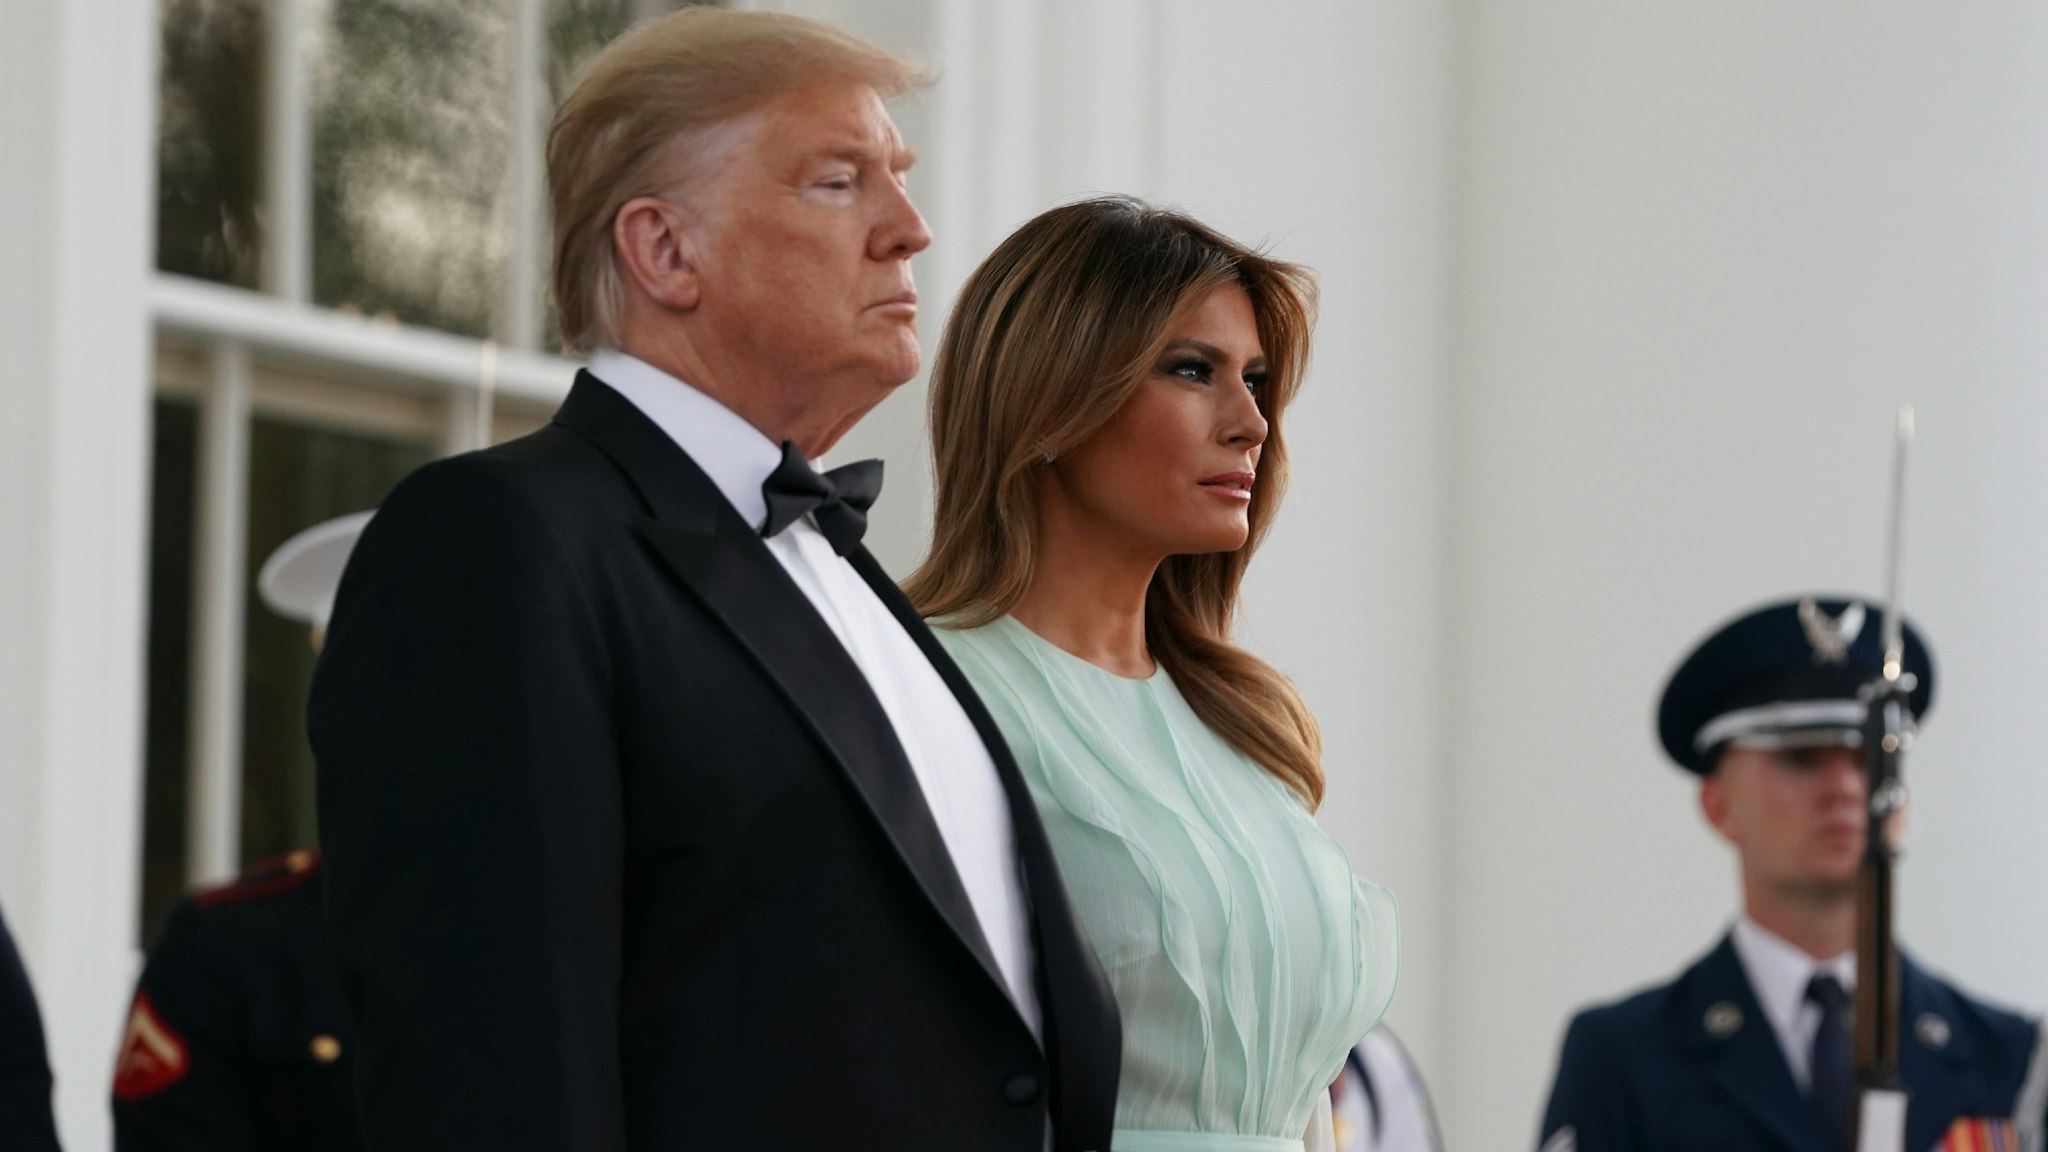 US President Donald Trump and First Lady Melania Trump arrive to welcome Australian Prime Minister Scott Morrison and his wife, Jennifer Morrison, for an Official Visit with a Official Visit with a State Dinner at the North Portico of the White House in Washington, DC, September 20, 2019. (Photo by ALEX EDELMAN / AFP) (Photo credit should read ALEX EDELMAN/AFP via Getty Images)